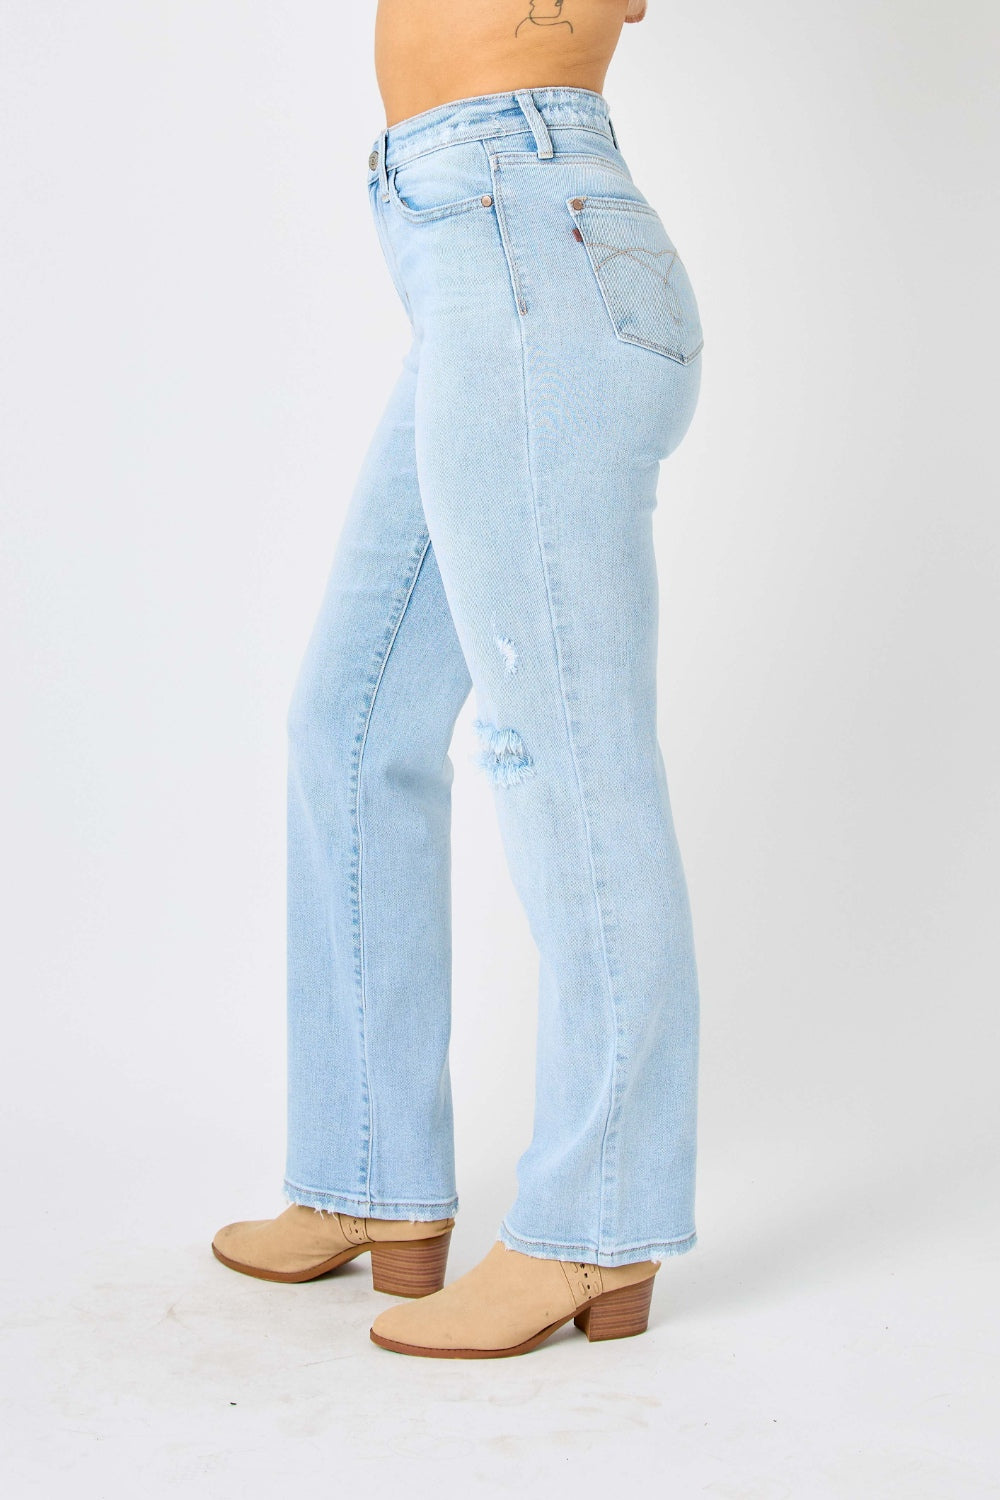 Cheeky Distressed High Waisted Straight Judy Blue Jeans